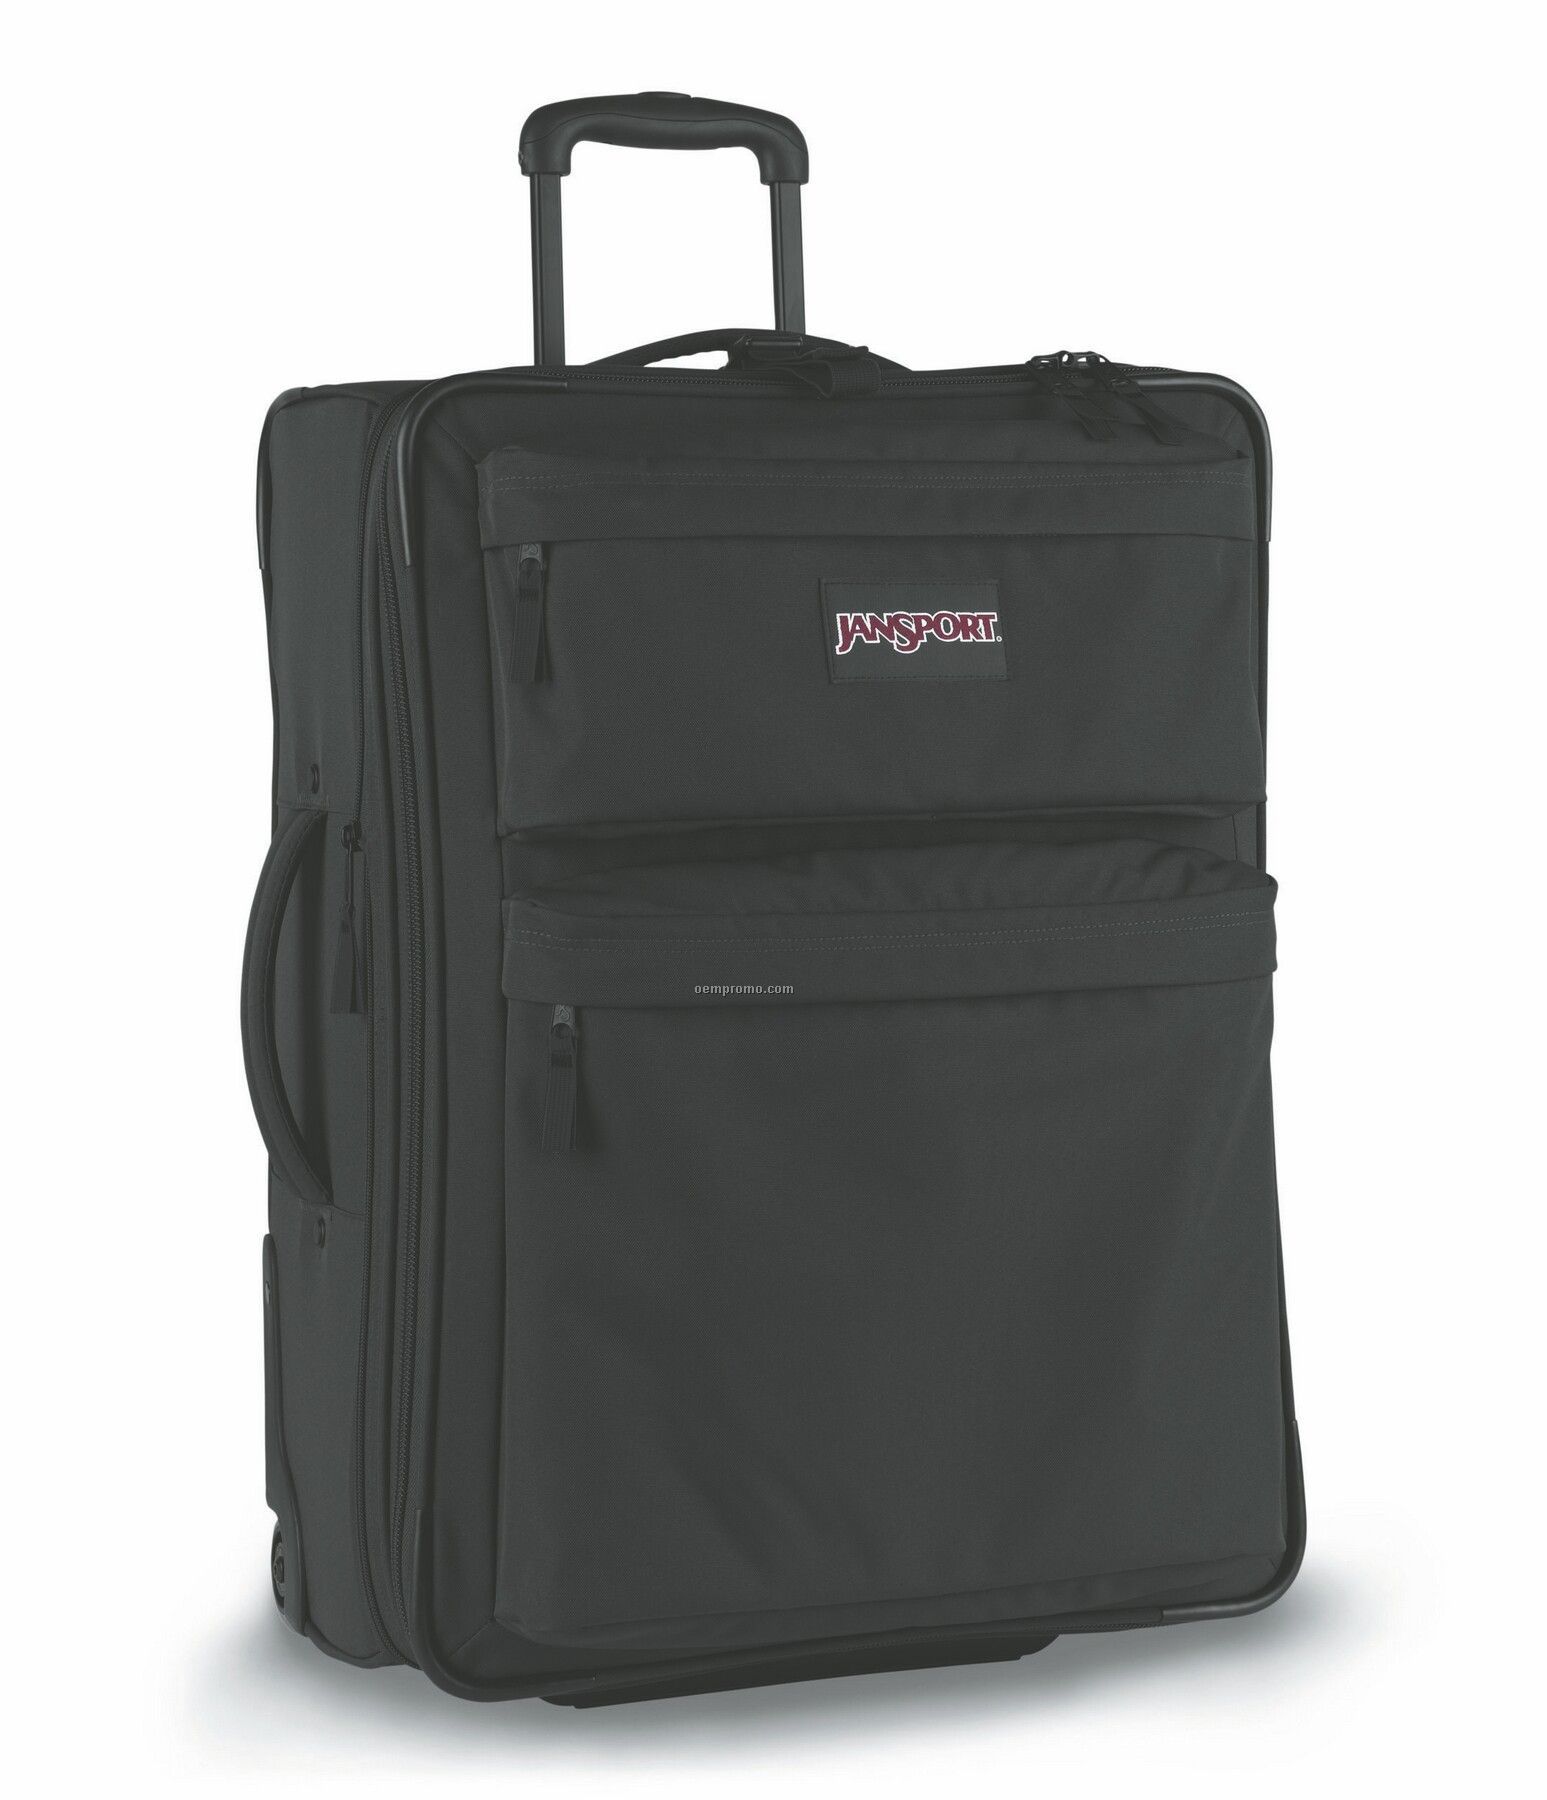 Jansport Travel Collection 24" Upright Luggage